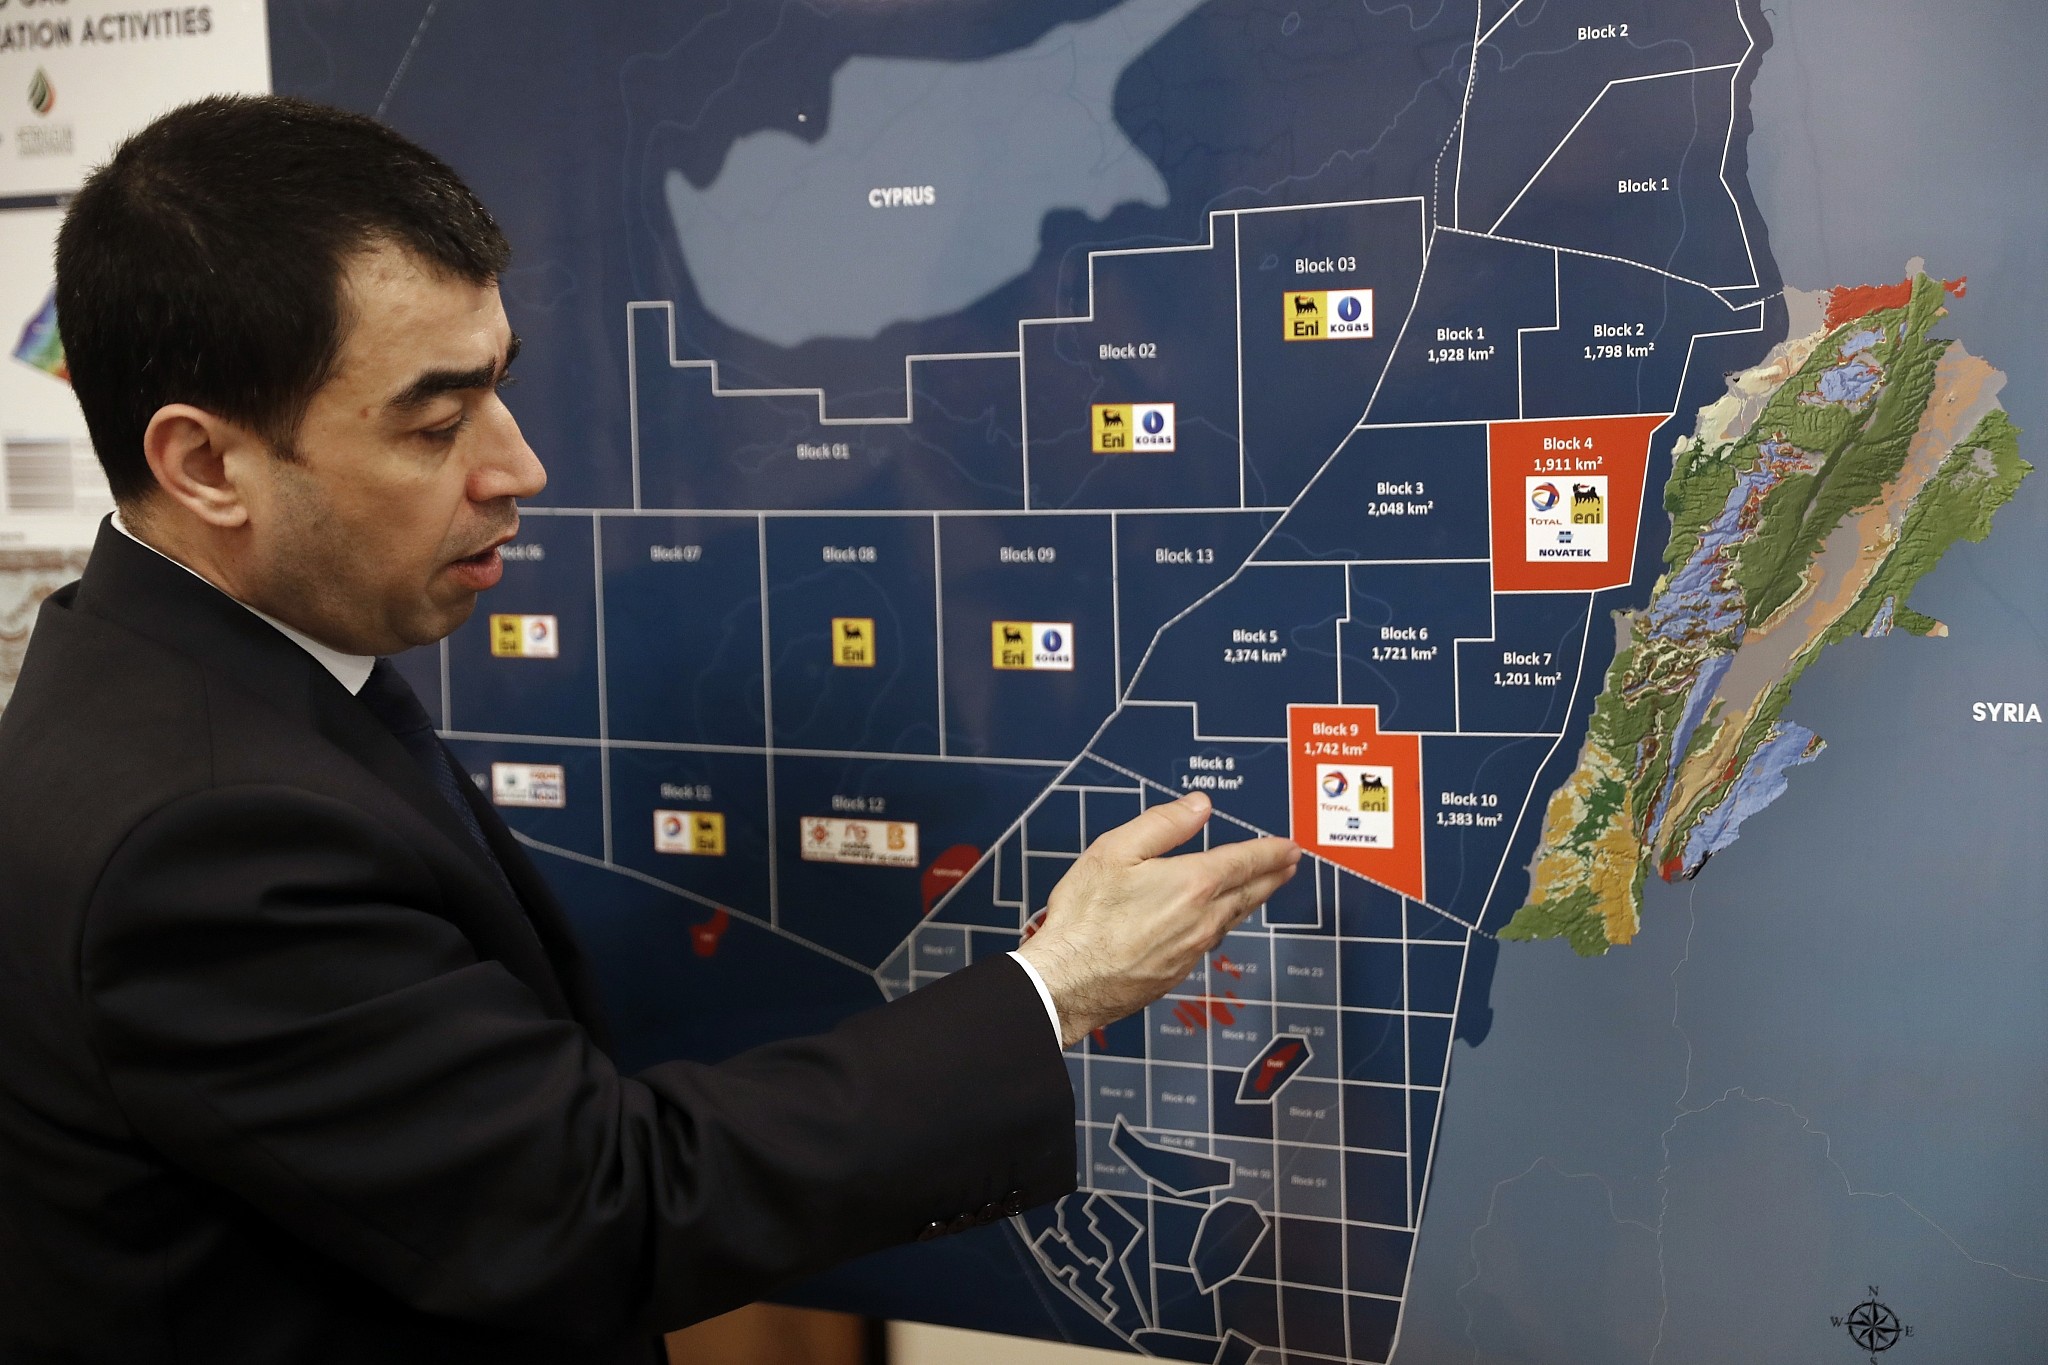 Lebanon's Energy Minister Cesar Abi Khalil, explains on the map about the offshore block 9 which Israel claims, during an interview with the Associated Press at his office, in Beirut, Lebanon, February 1, 2018. (Hussein Malla/AP)